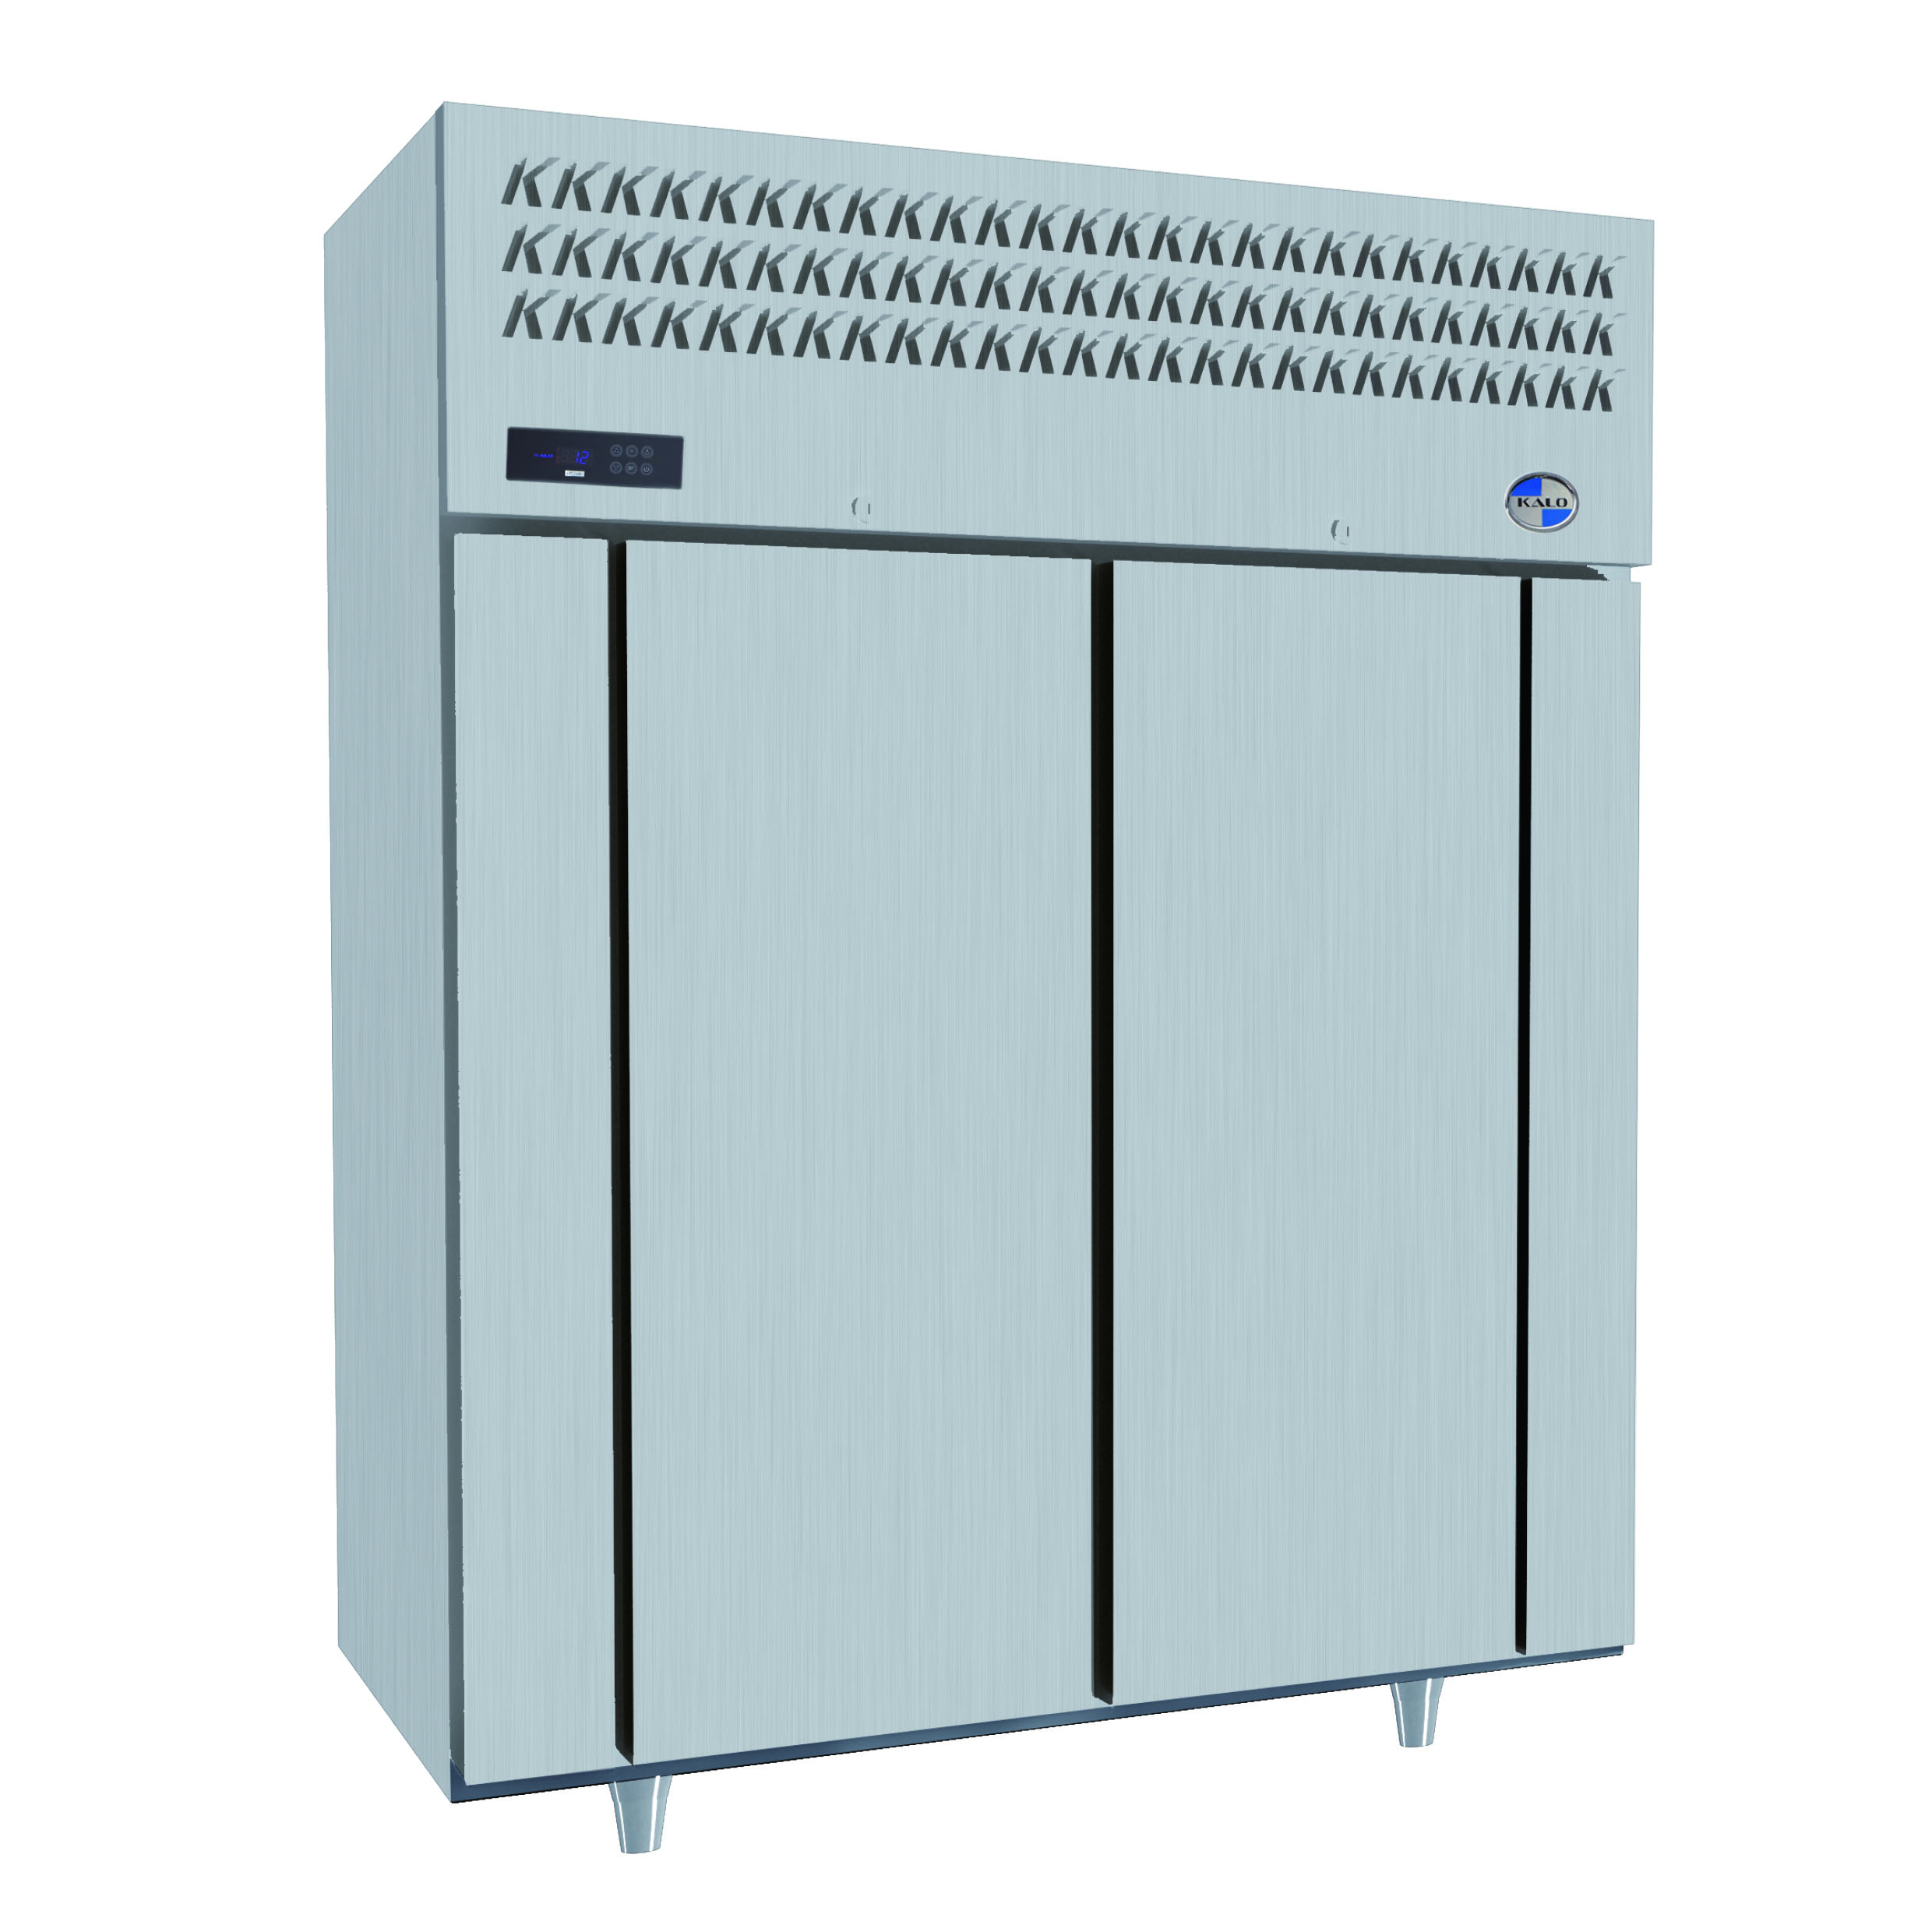 Thaw cabinet series